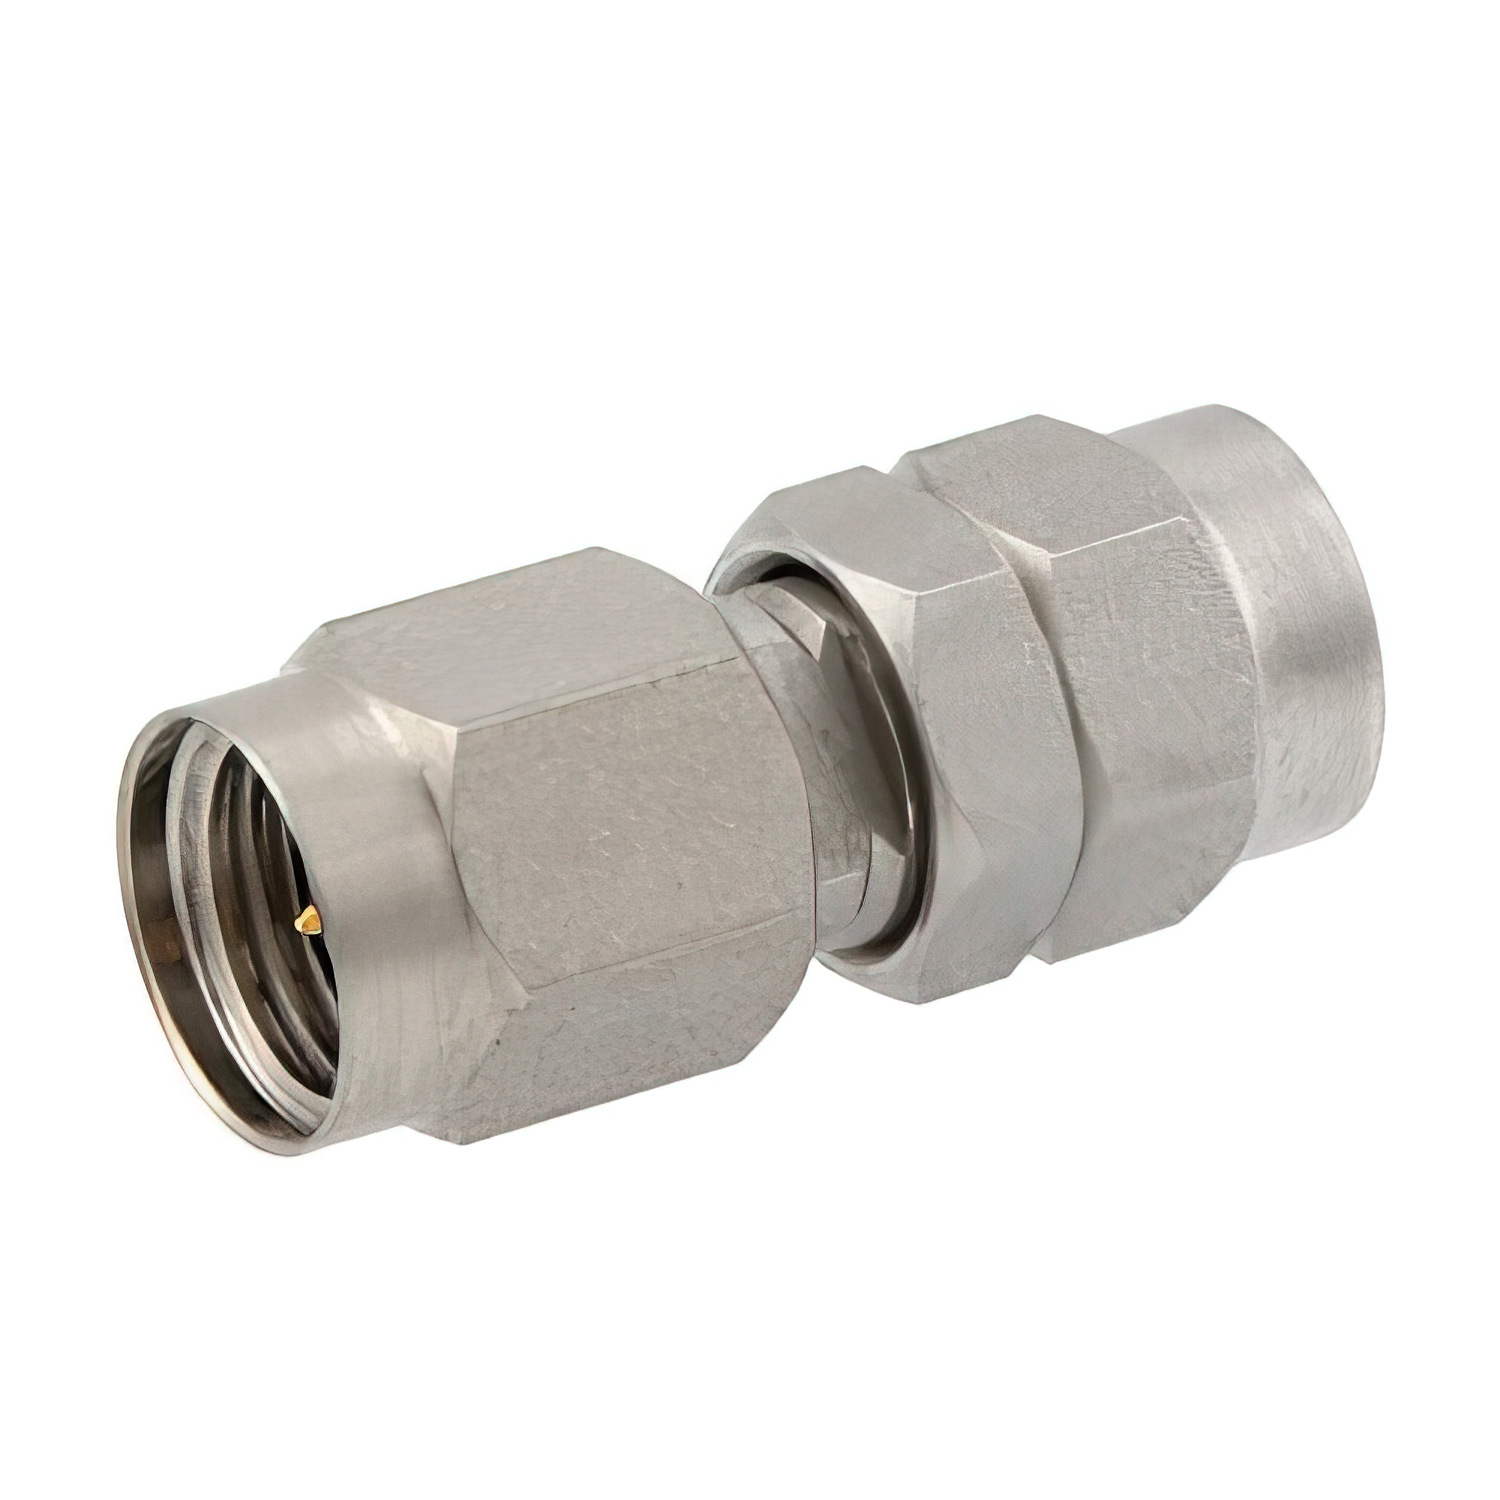 2.4mm male to 1.85mm male adapter1